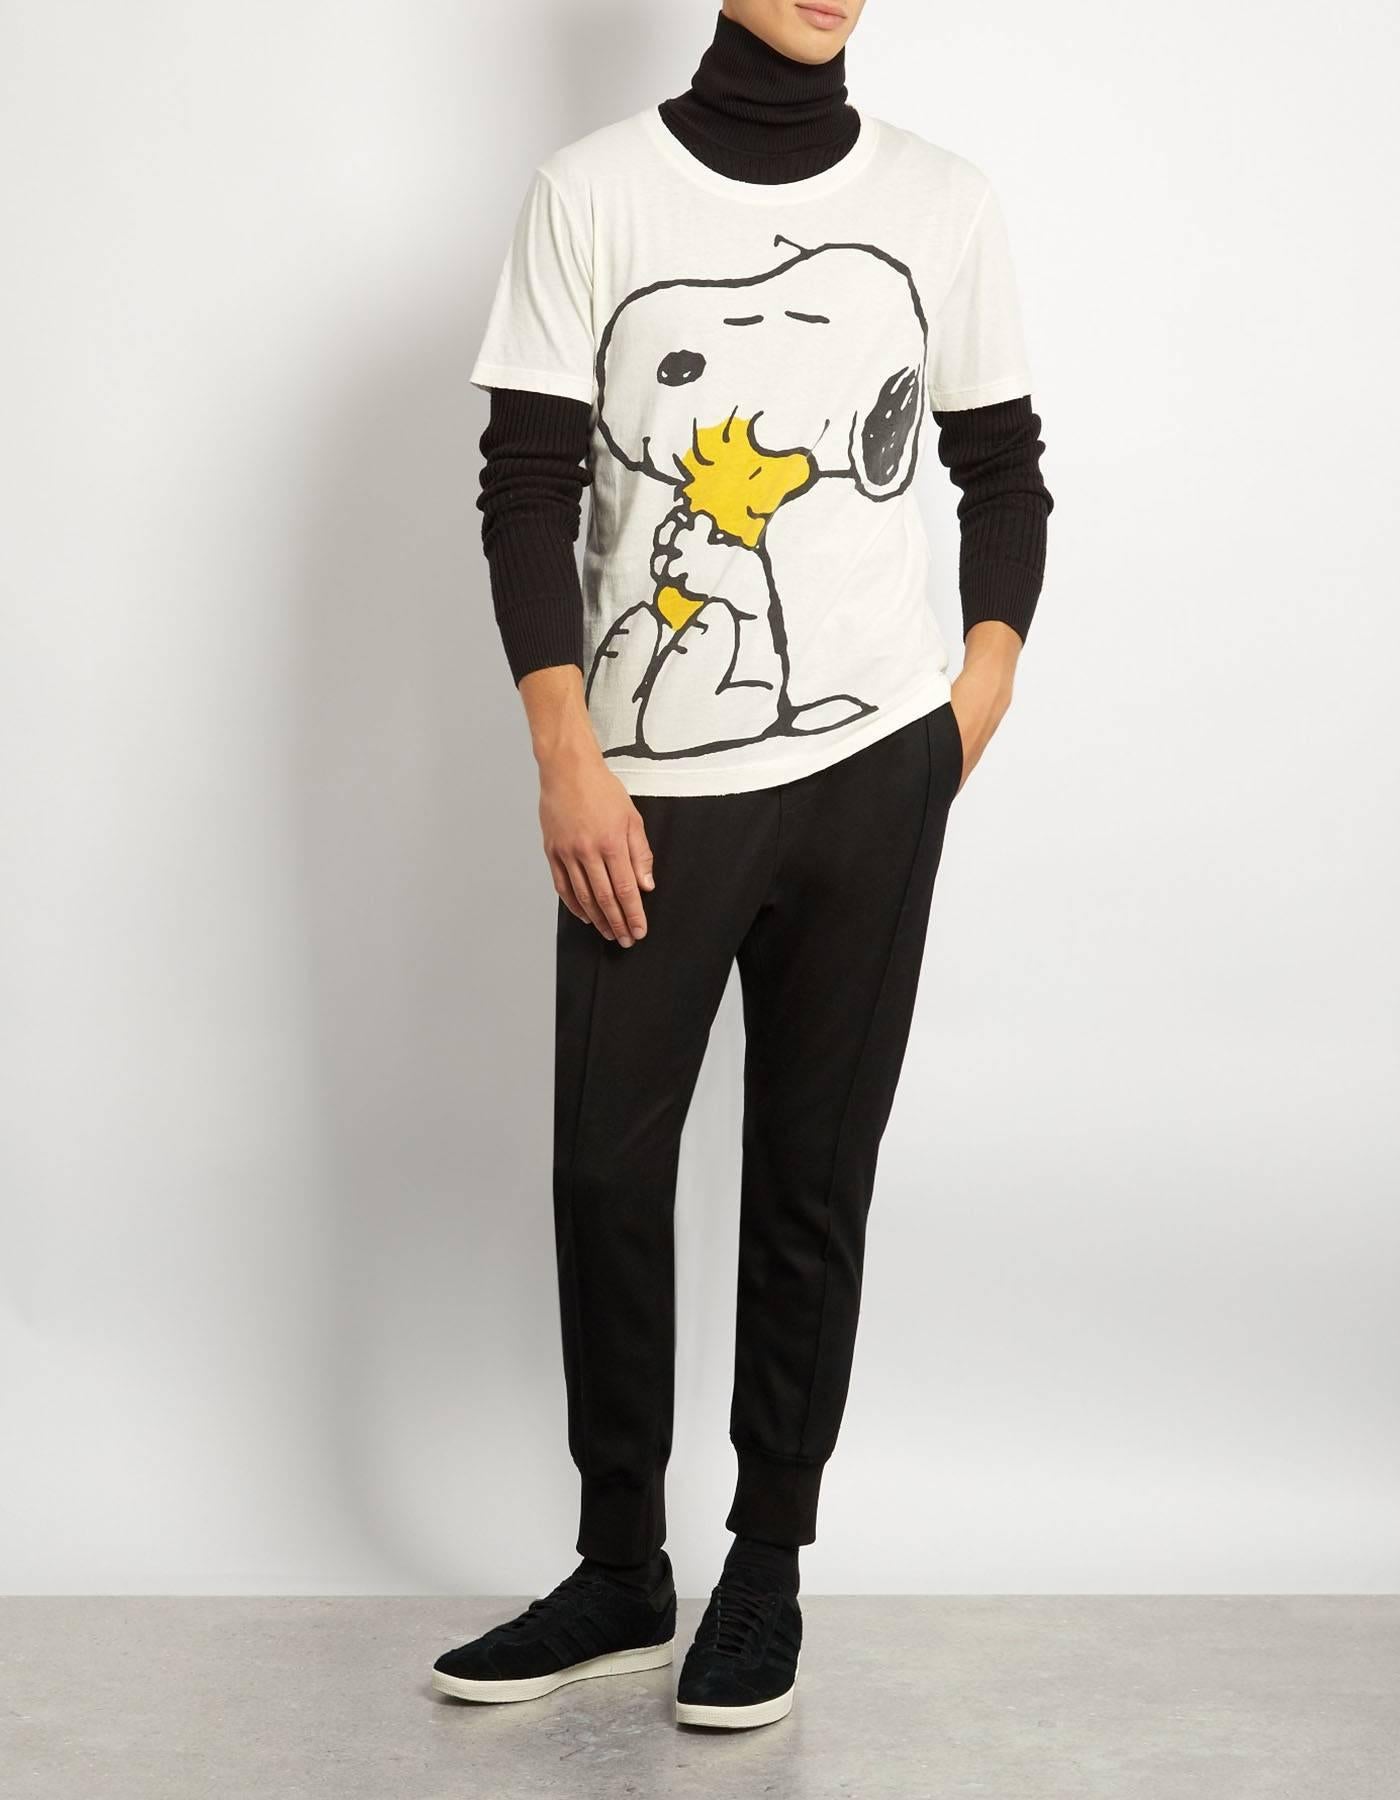 Gucci Men's '16 Snoopy & Woodstock Distressed T-Shirt Sz XL

Features distressed holes and wear long trim

Made In: Italy
Color: White
Composition: 100% cotton
Lining: None
Closure/Opening: Pull over 
Exterior Pockets: None
Interior Pockets: